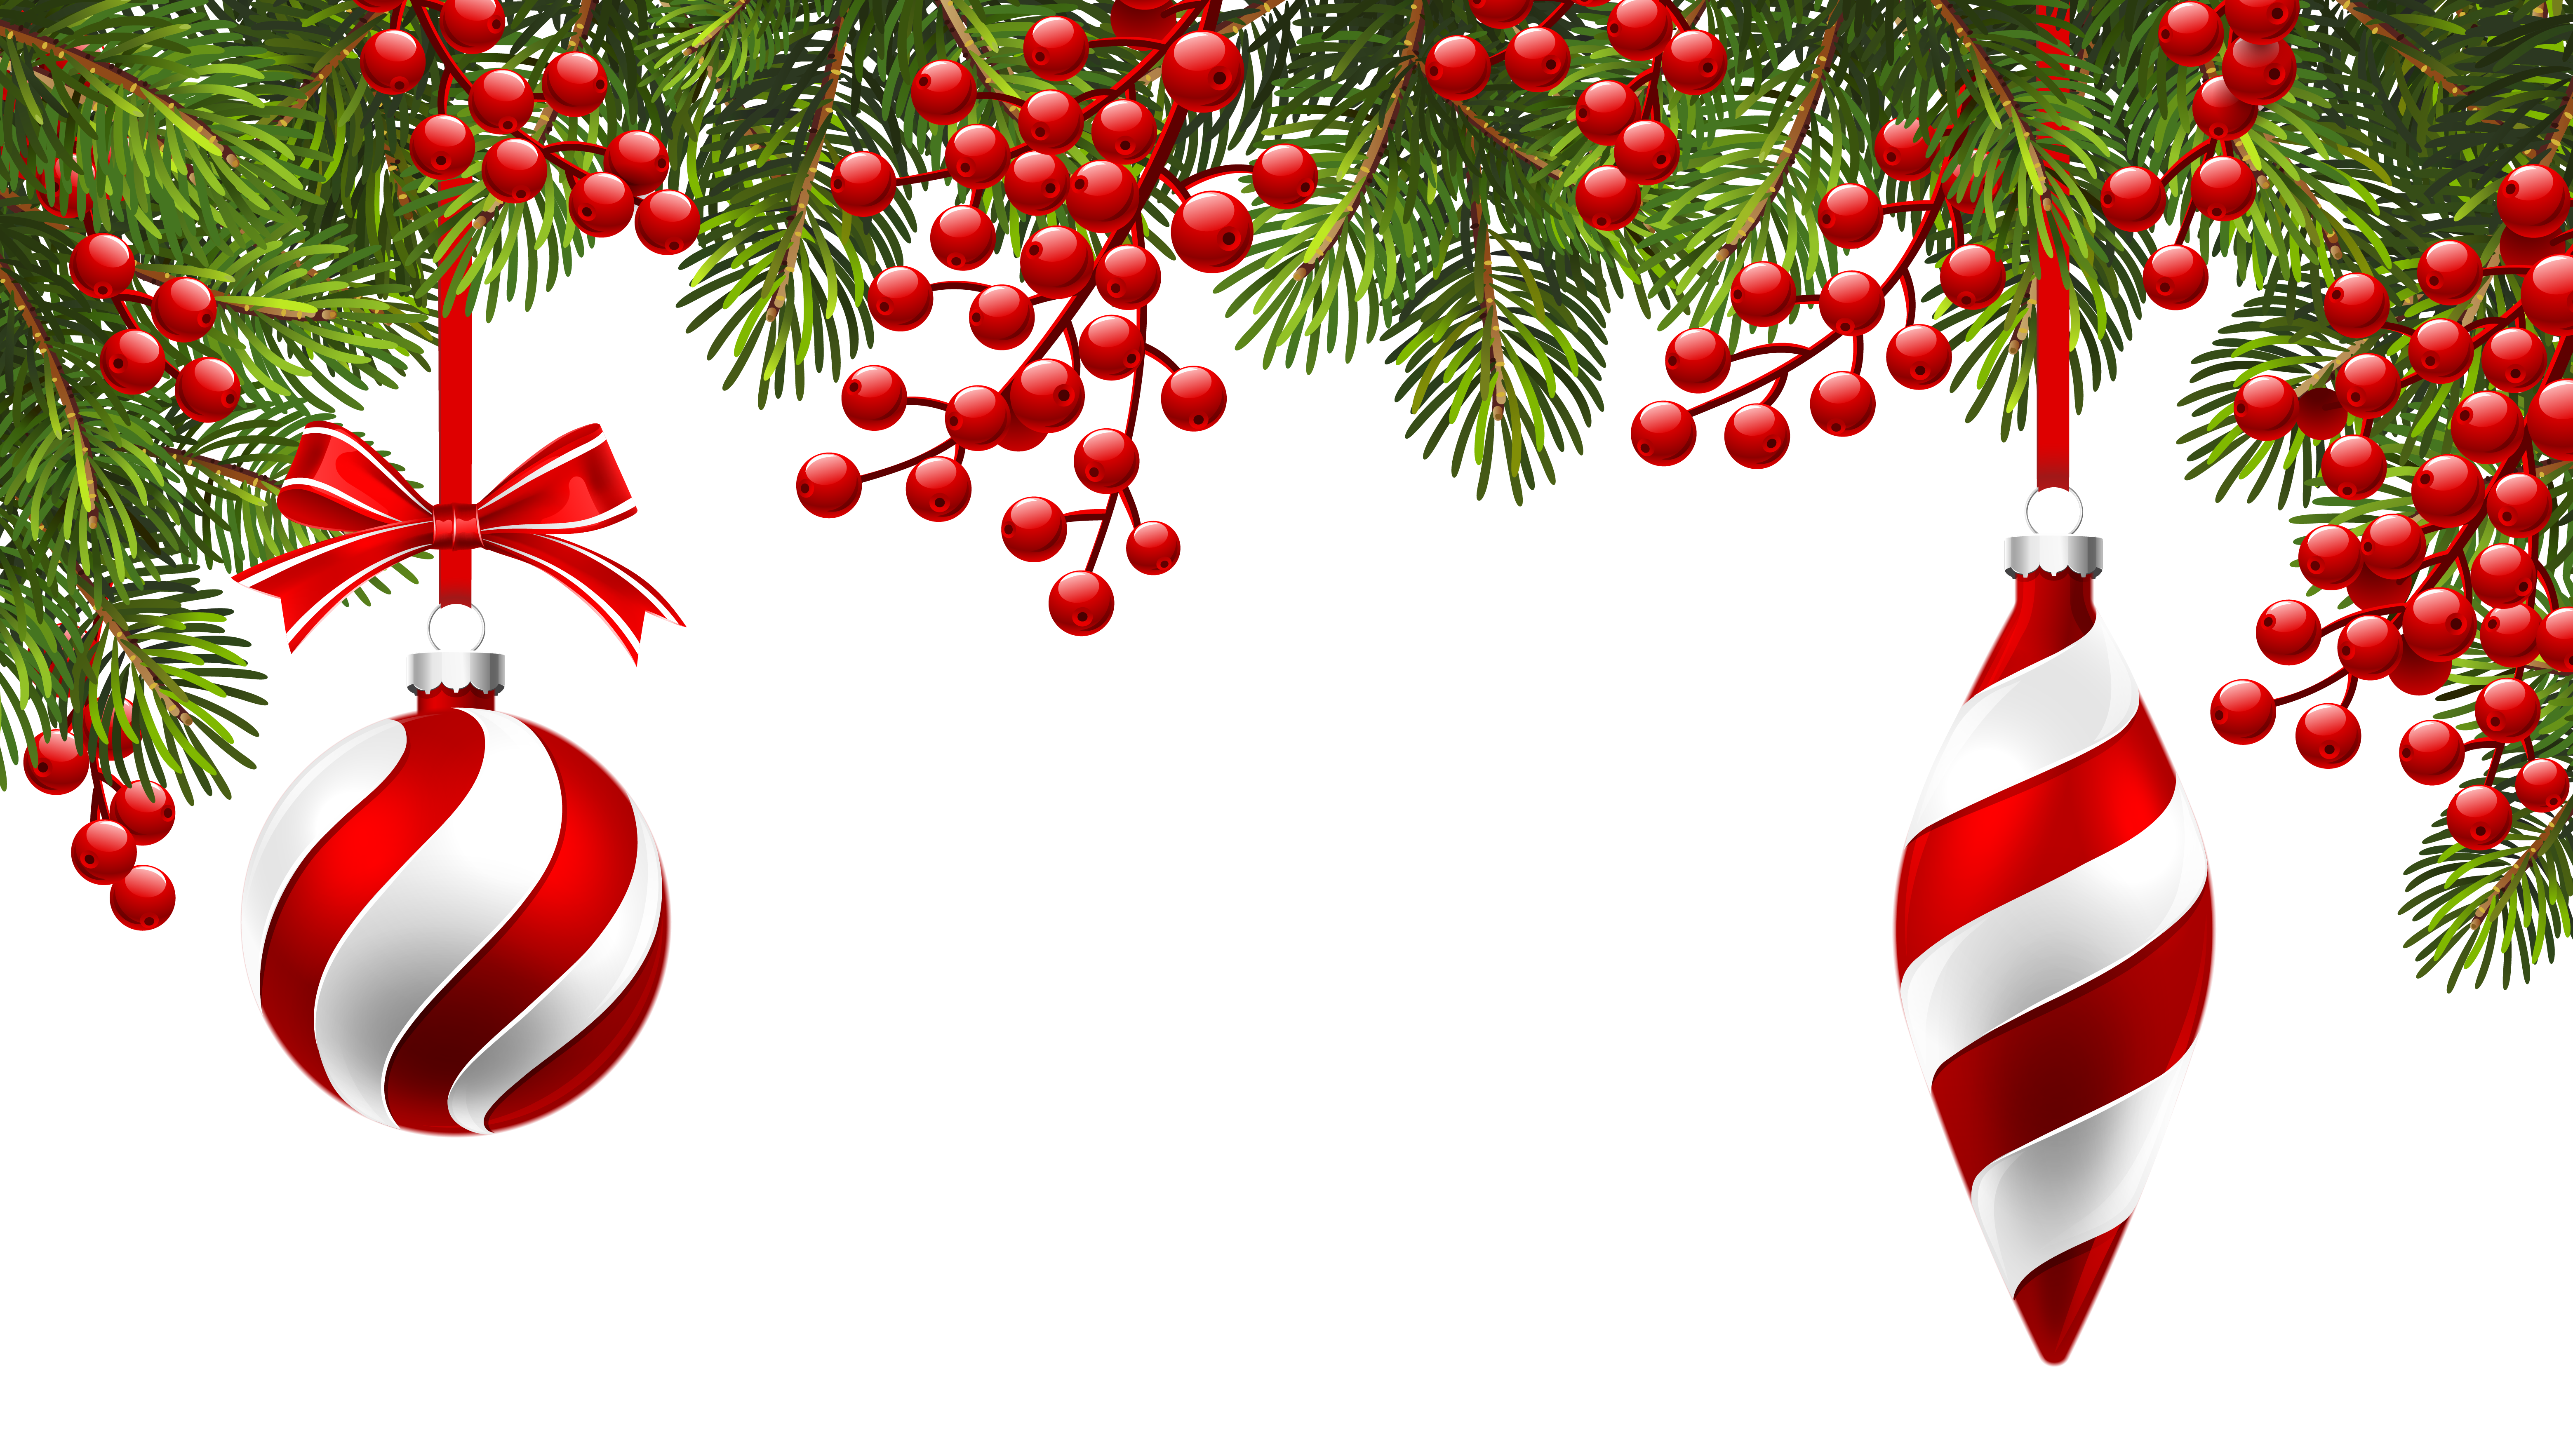 https://gallery.yopriceville.com/var/albums/Free-Clipart-Pictures/Christmas-PNG/Christmas_Pine_Decoration_PNG_Clipart_Image-1174460299.png?m=1446177301